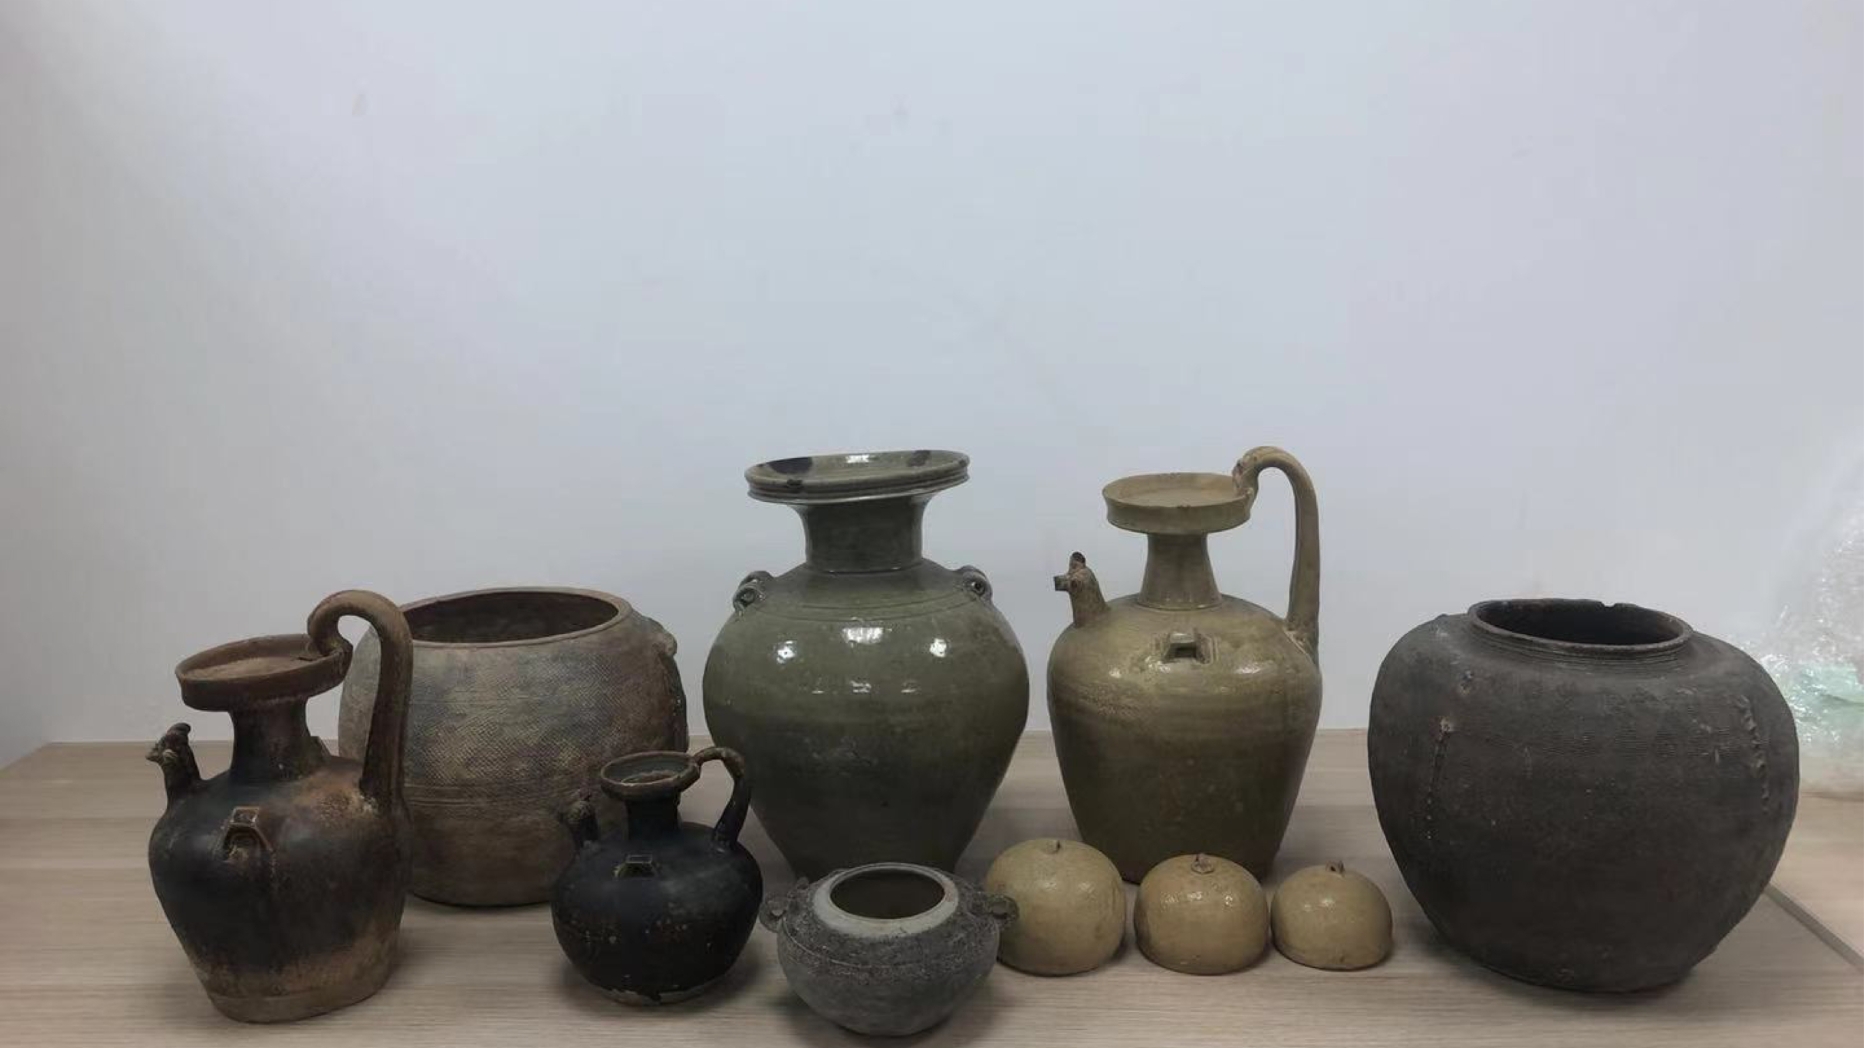 Collected porcelain jars, wine pots and cups. Credit to Zhu Li.